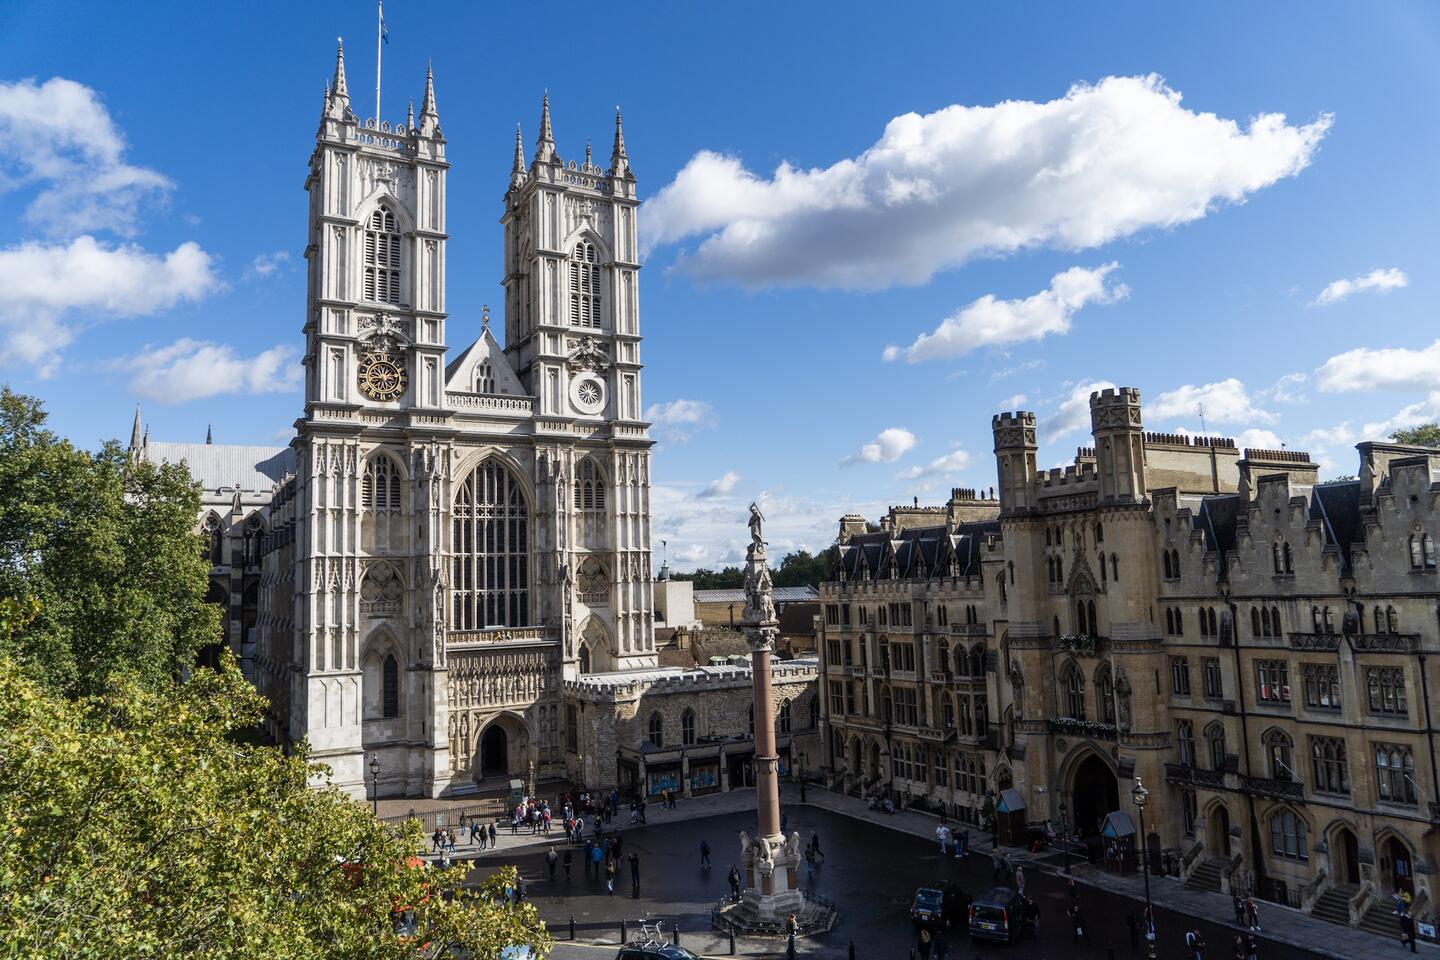 Student Accommodation in Westminster, London - Westminster Abbey on a clear day